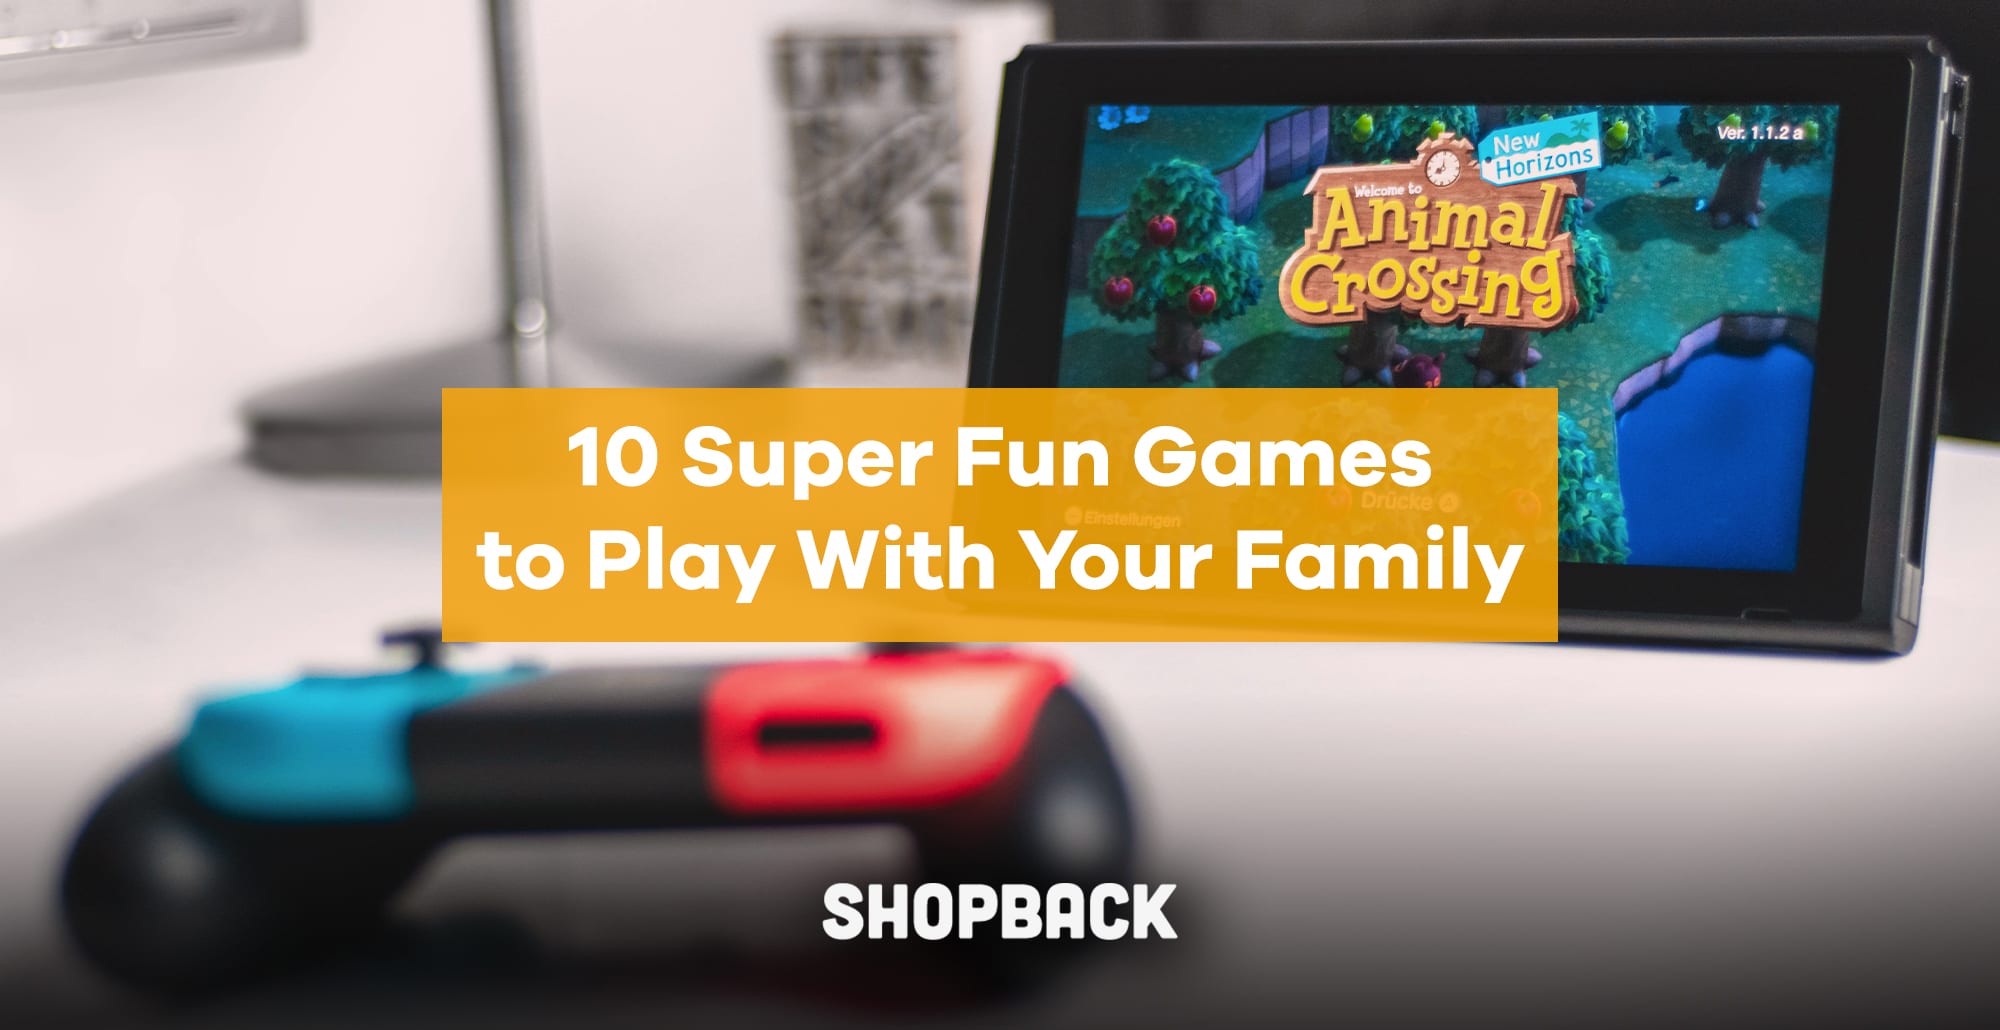 10 Super Fun Games To Play With Your Family - Animal Crossing, Super Mario,  Jenga and more!